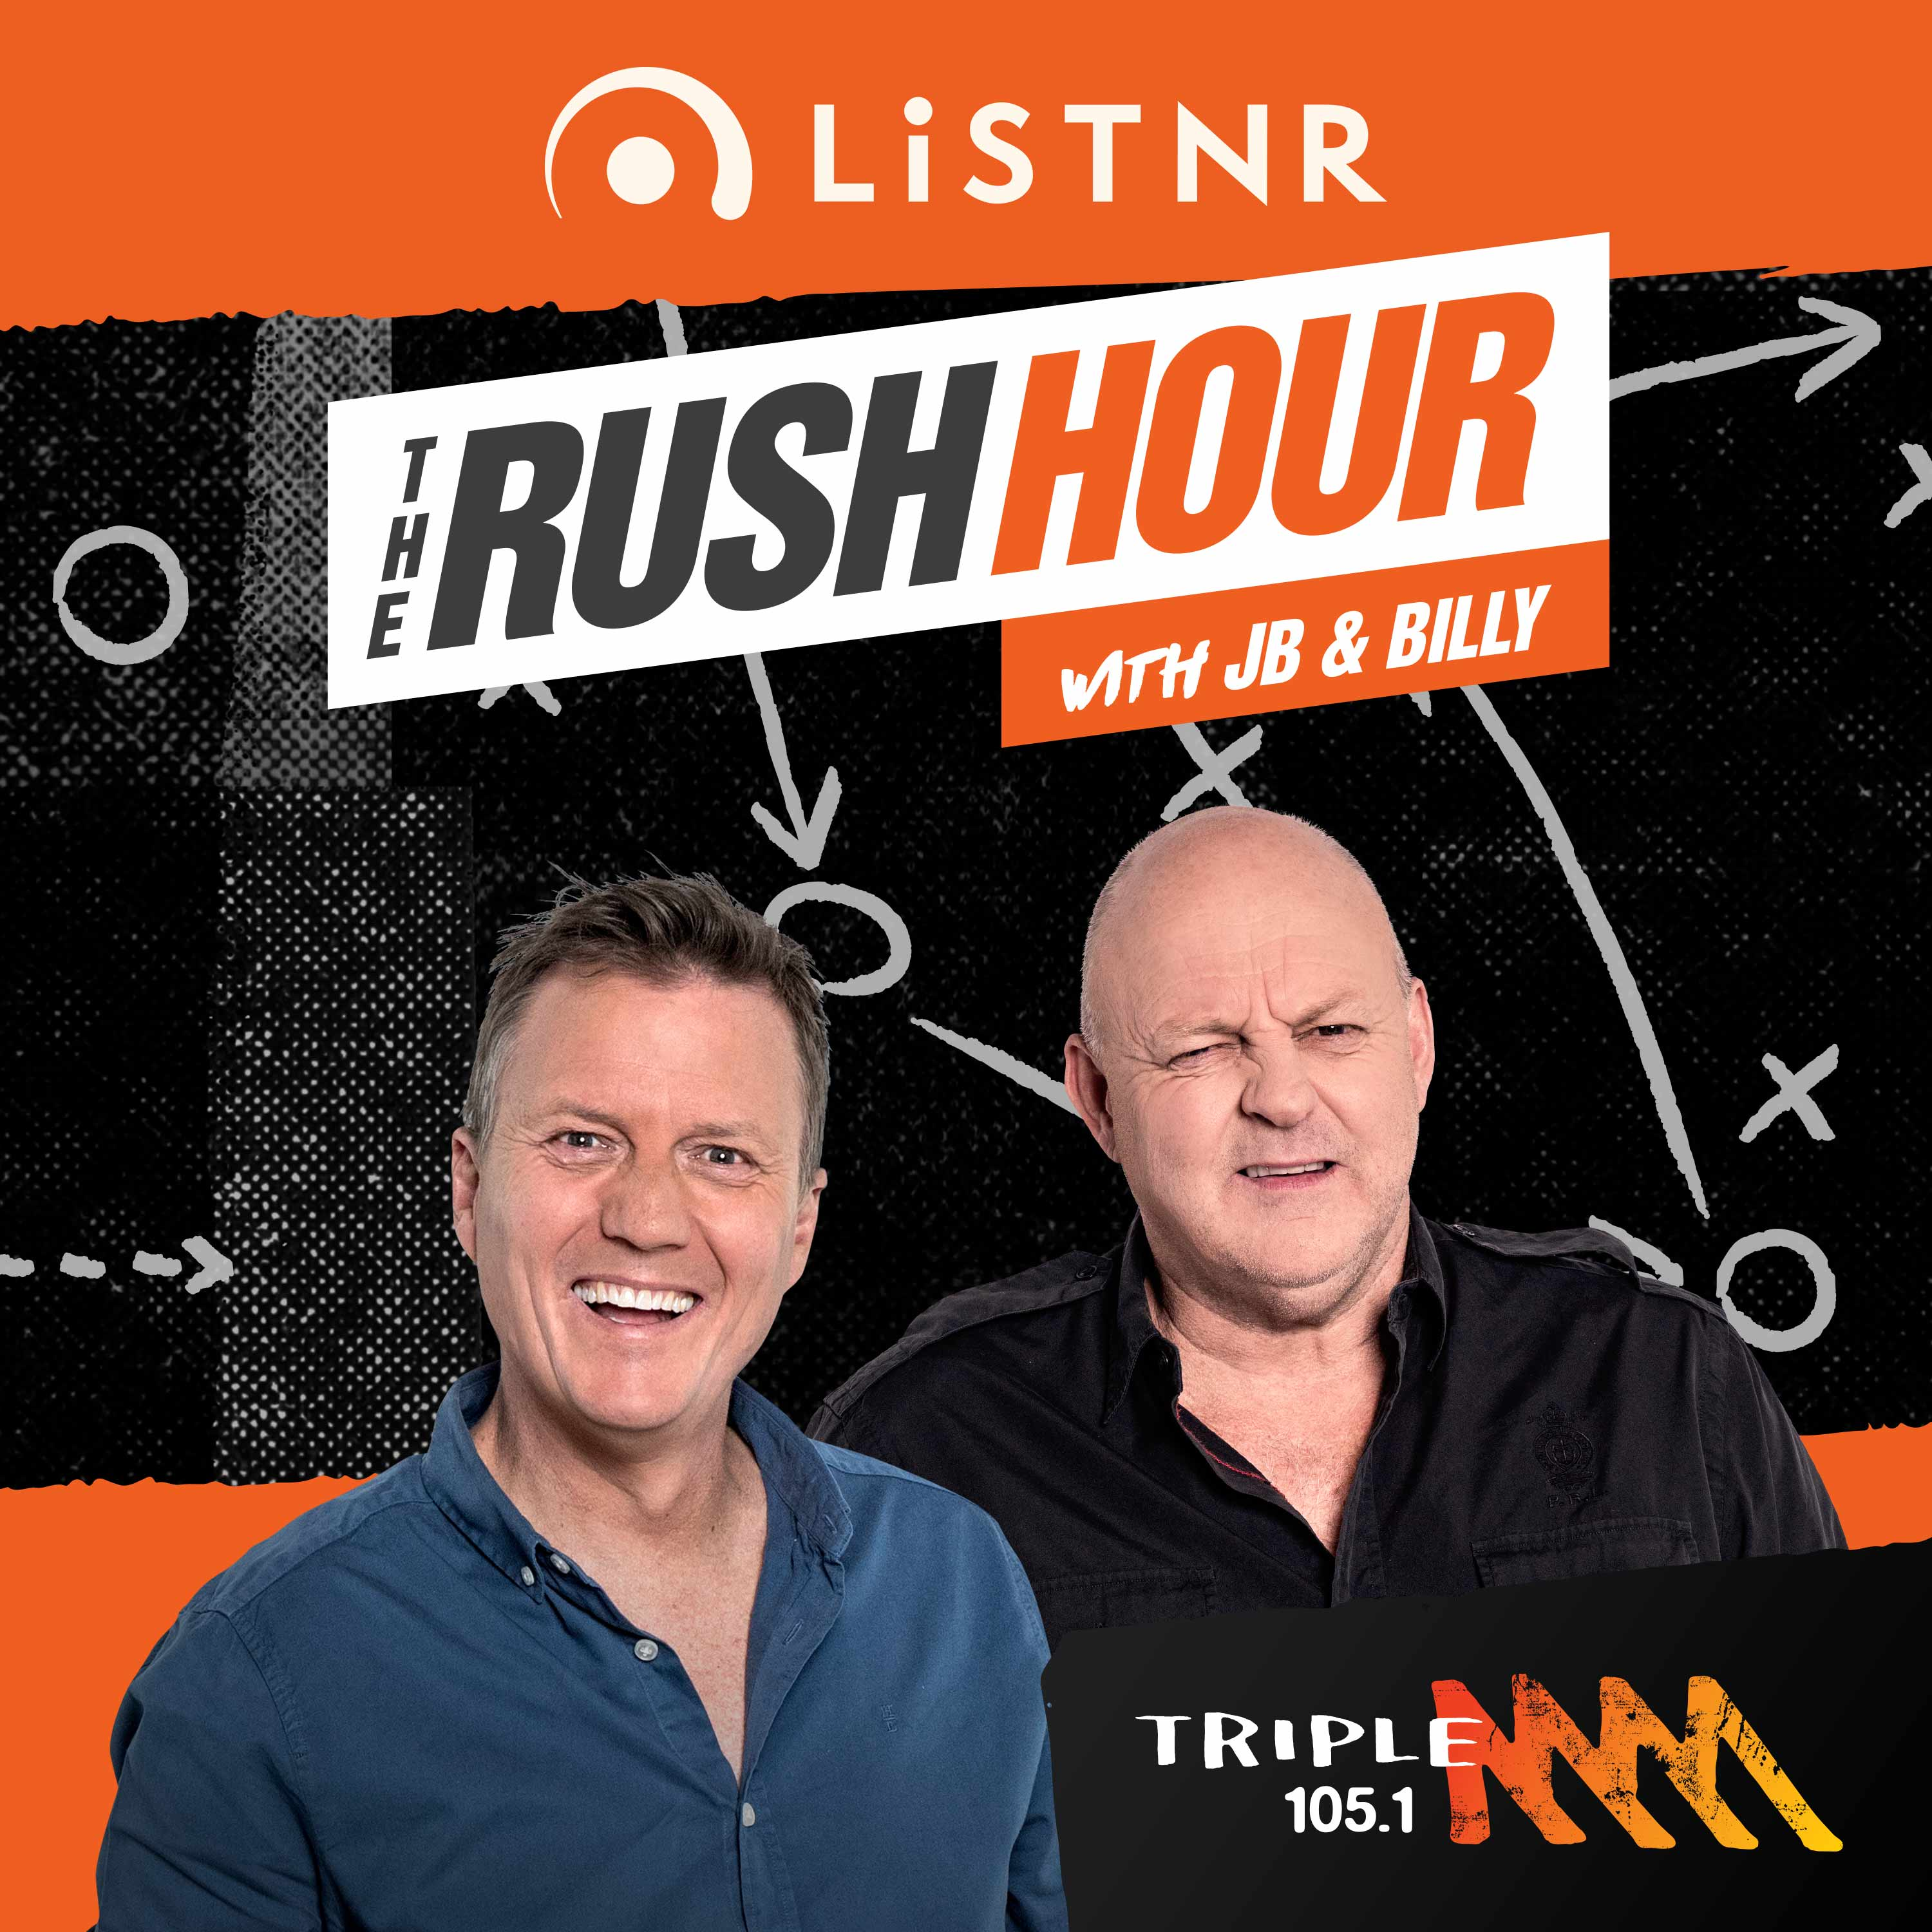 Carlton's Ed Curnow, a Humdinger Quiz, Two-Jokes Brownless - The Rush Hour podcast - Wednesday 7th April 2021